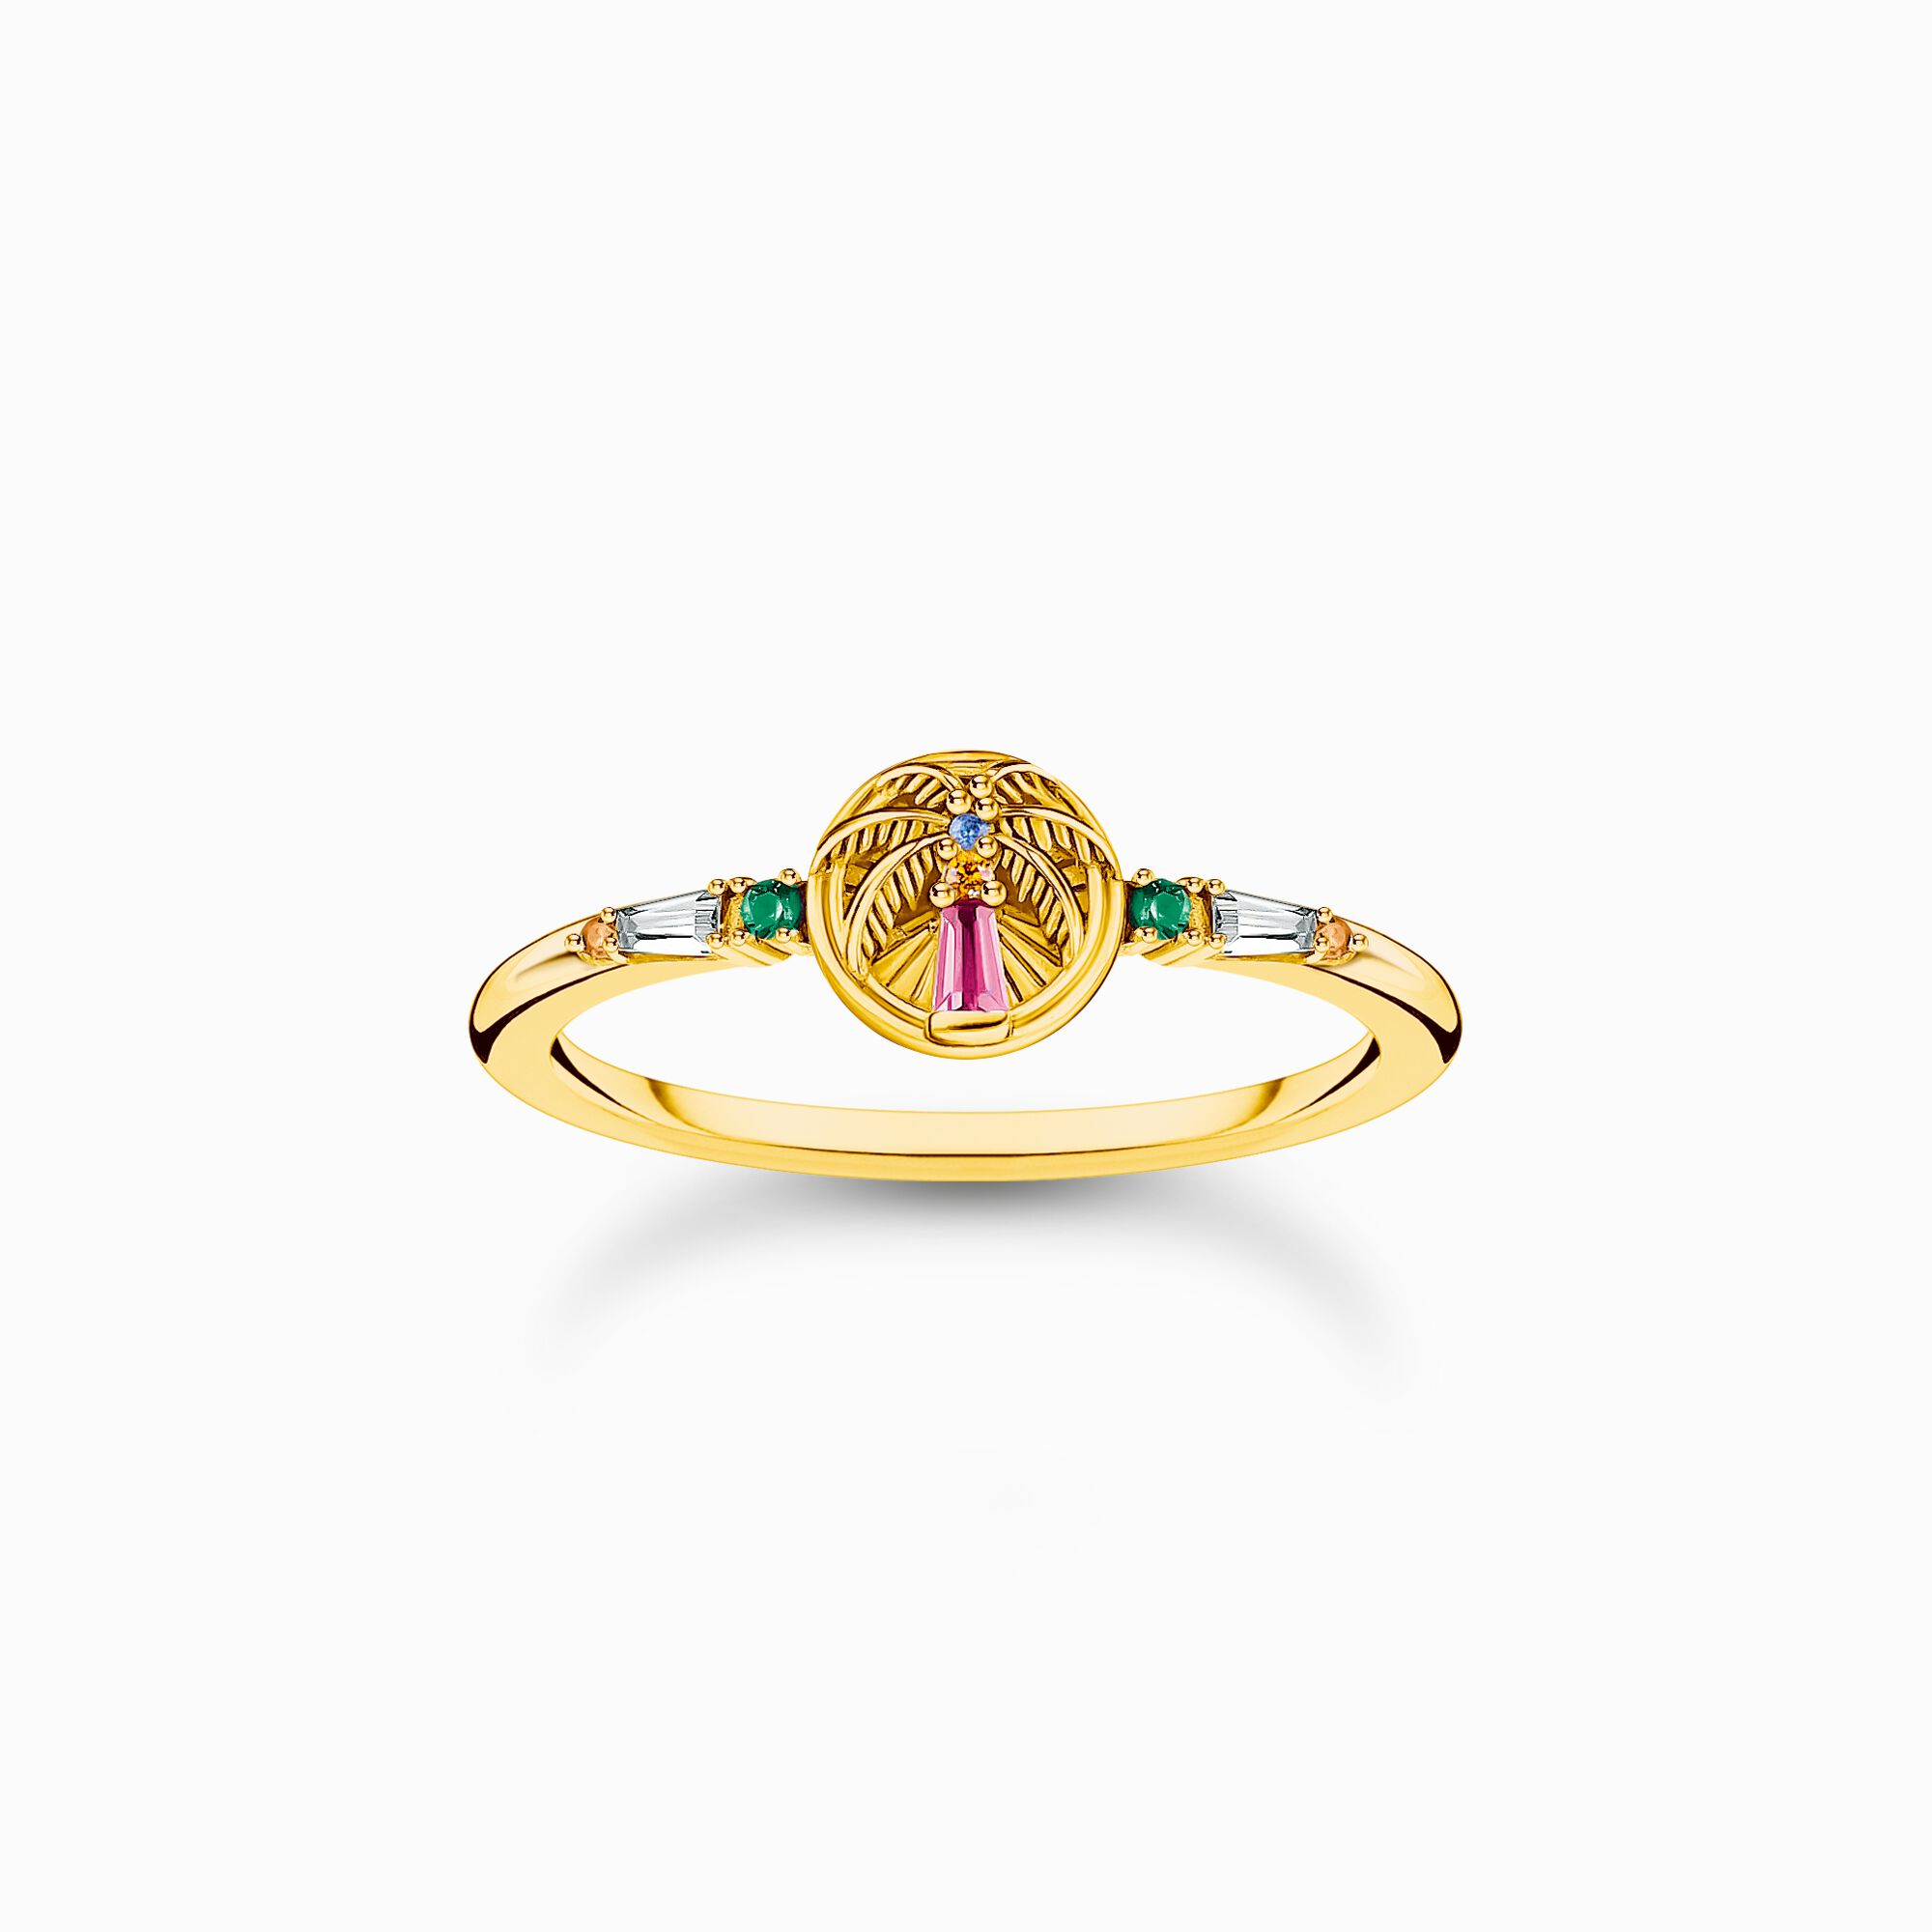 Gold-plated ring with palm tree and colourful stones from the Charming Collection collection in the THOMAS SABO online store